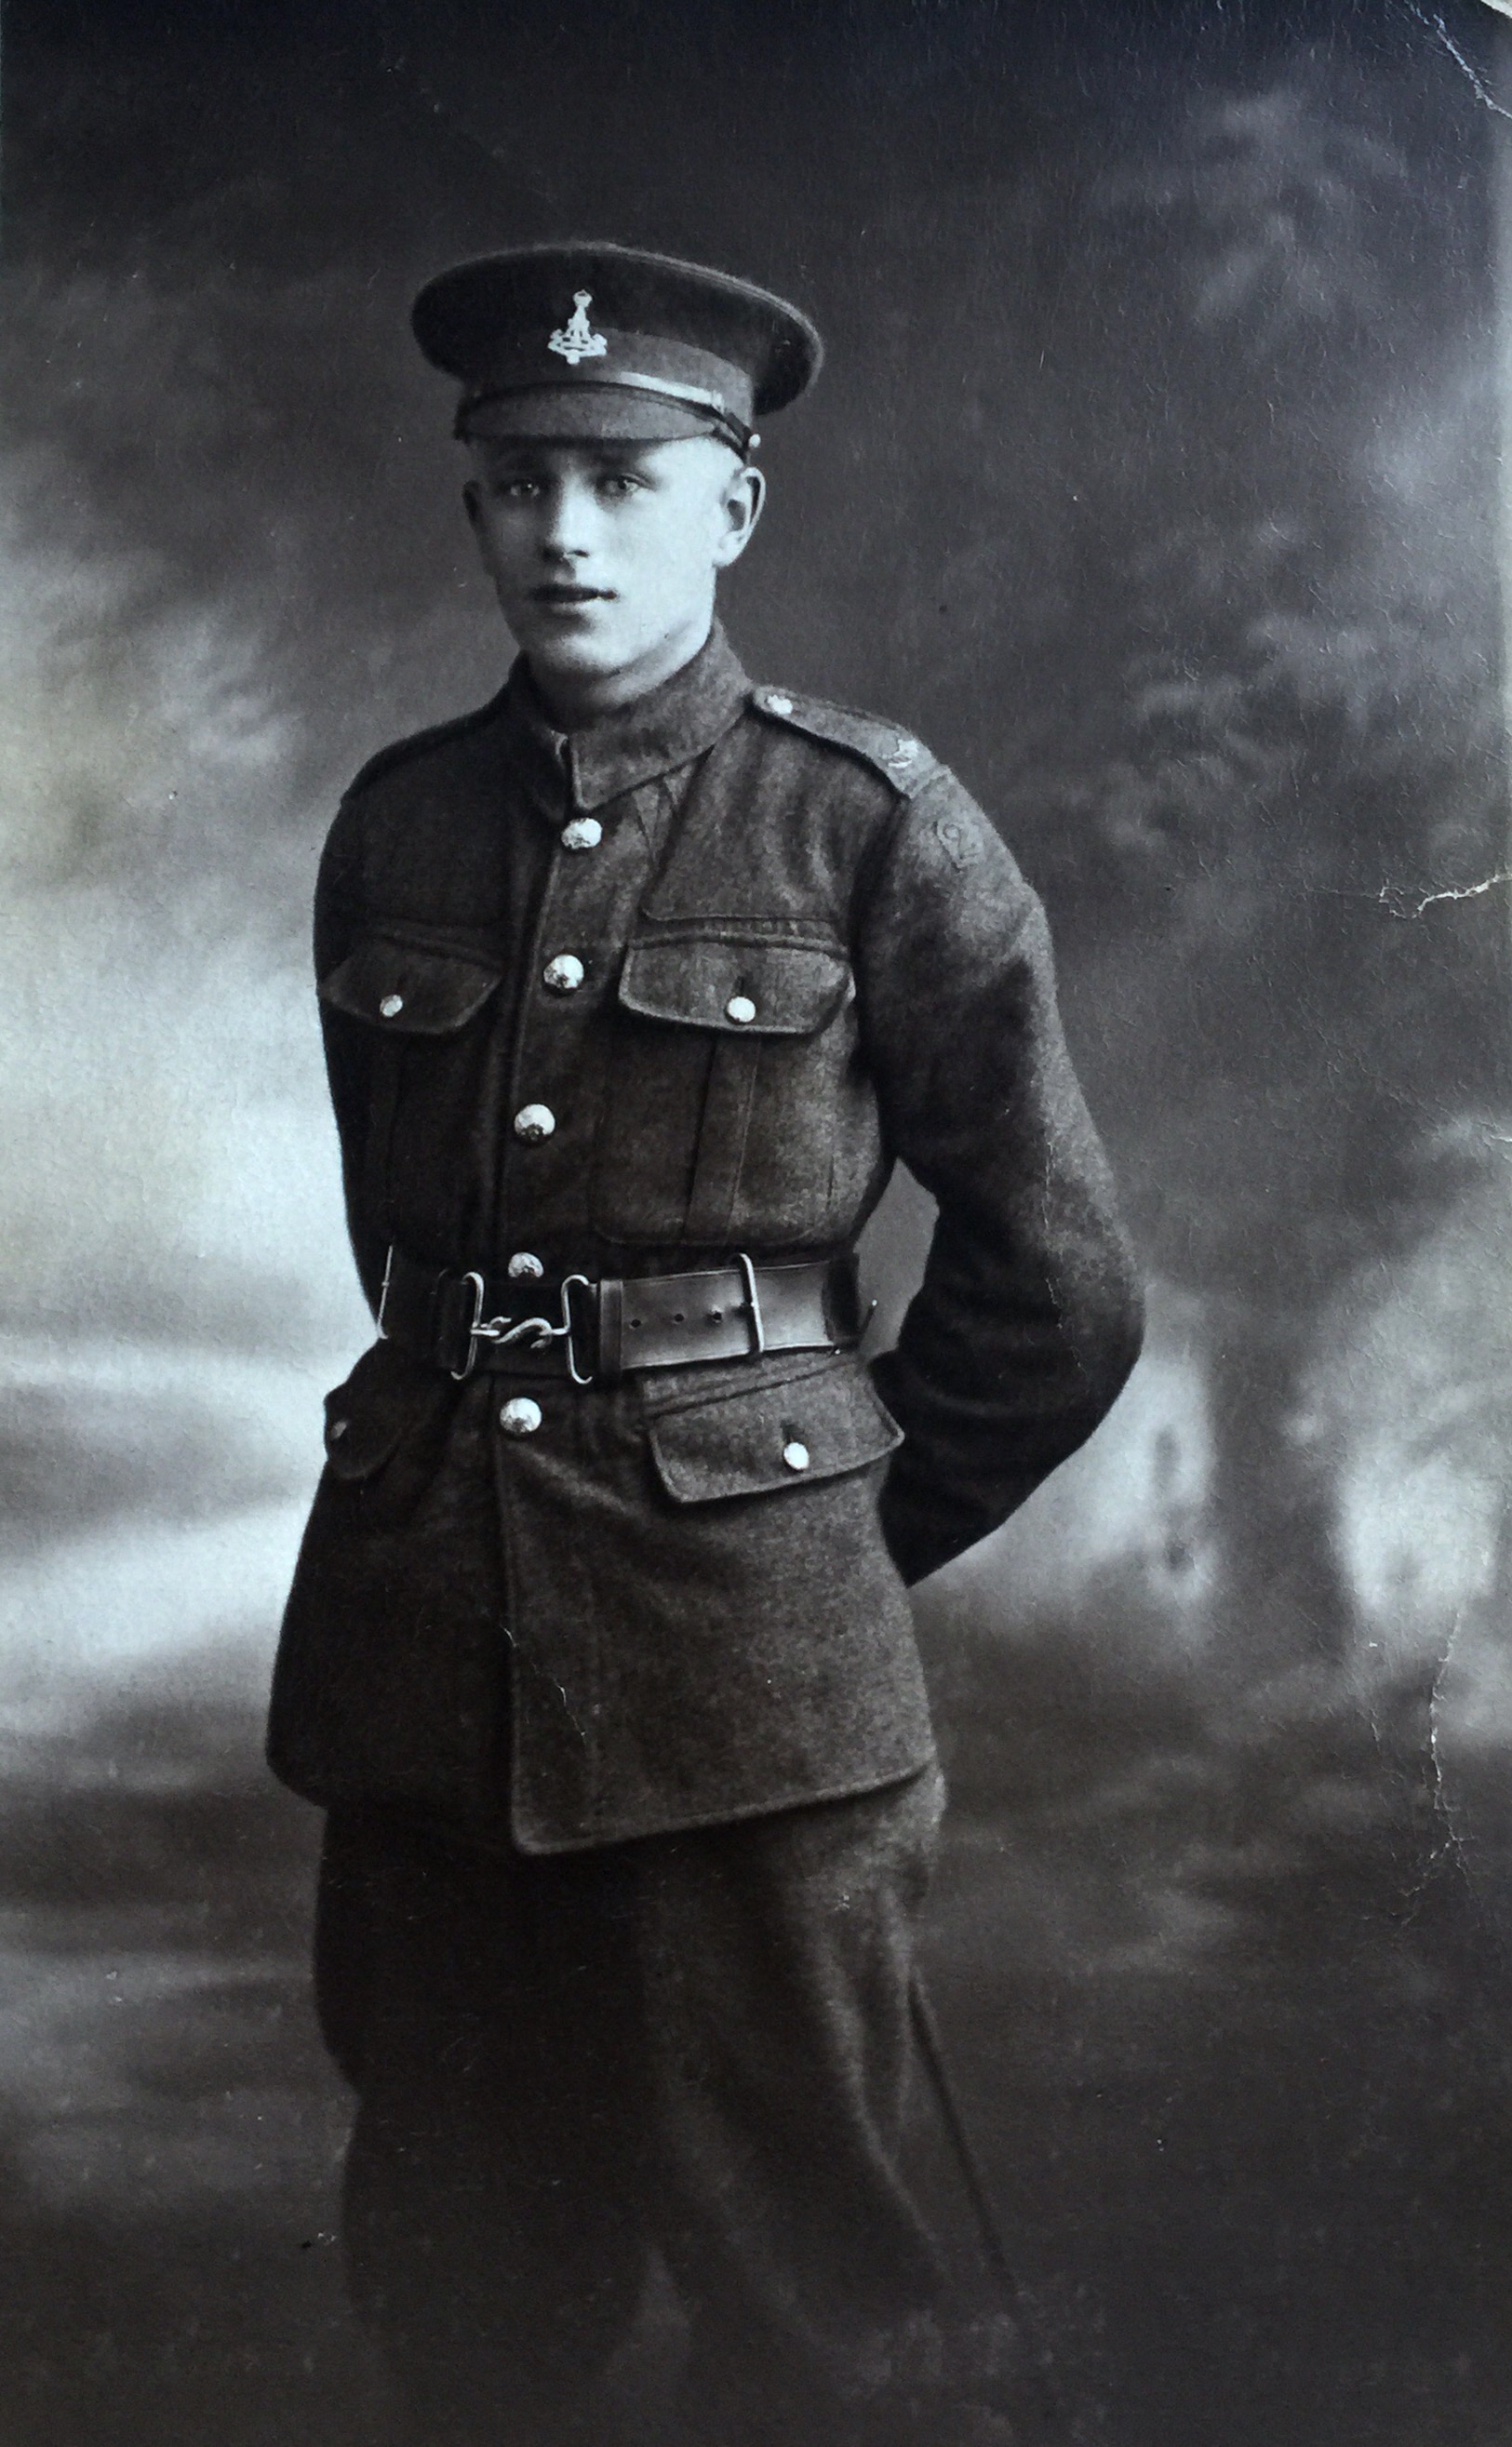 Ernest Newbold. 2nd Battalion, Yorkshire Regiment. Born 1898. Died 22 March 1918, age 19.  Commemorated in the Pozieres Memorial, France. 
My husband's Great Uncle on his mother's side. 